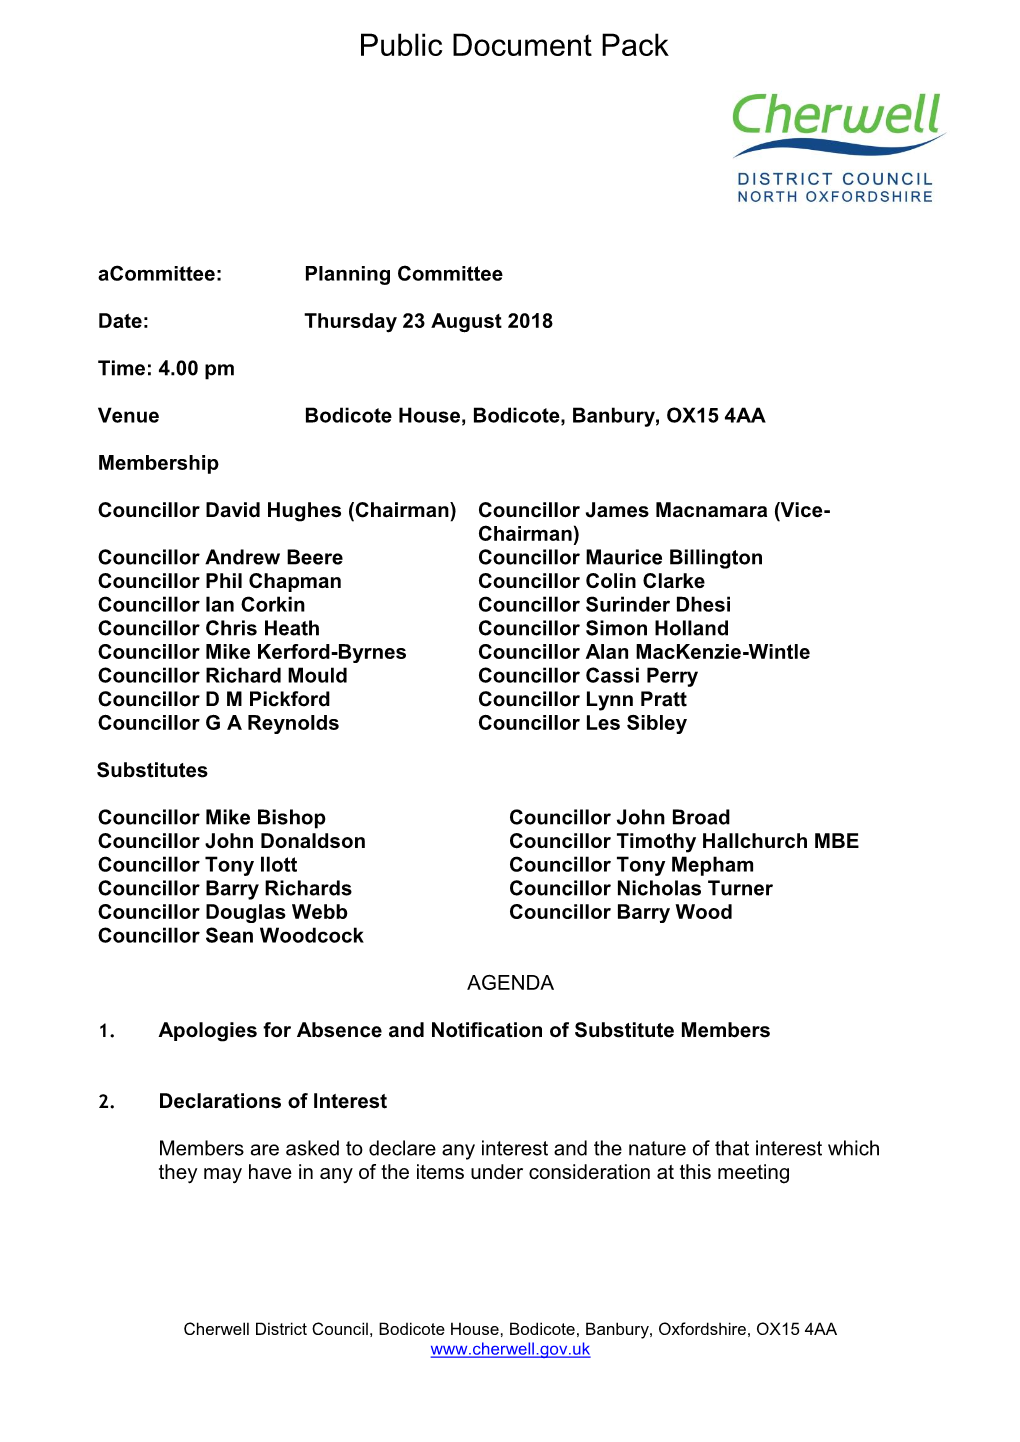 (Public Pack)Agenda Document for Planning Committee, 23/08/2018